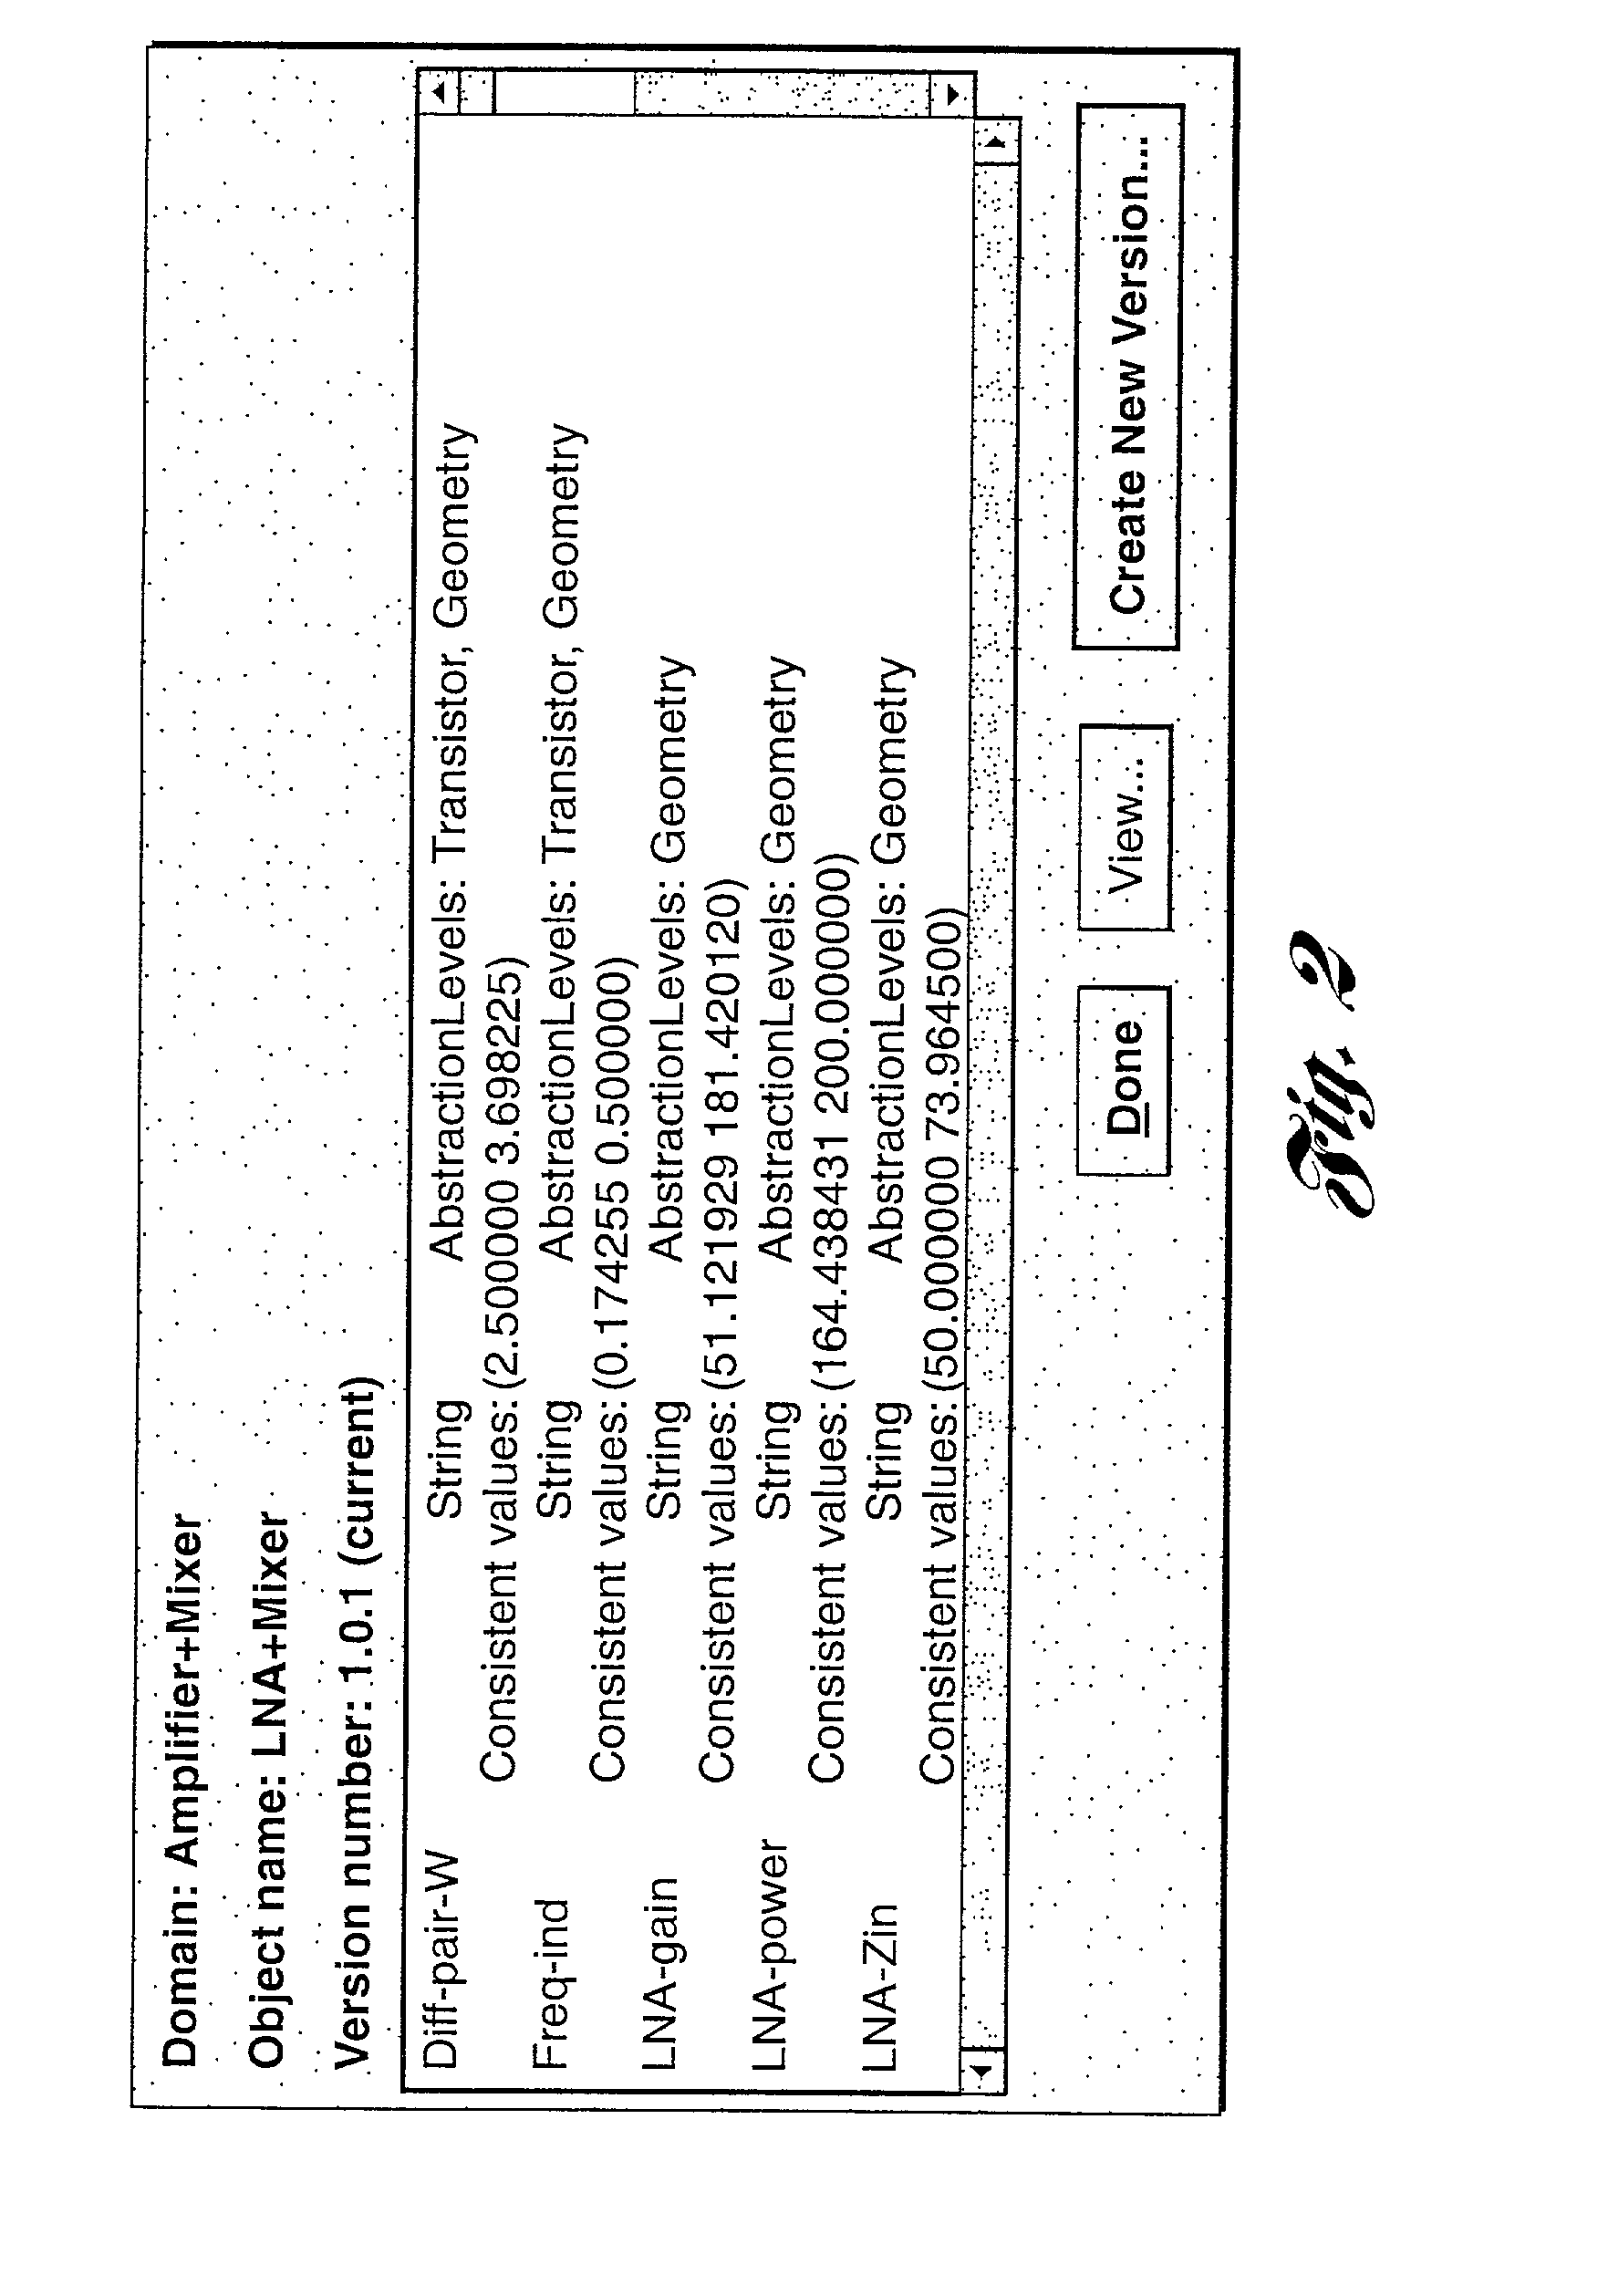 Method and system for providing constraint-based guidance to a designer in a collaborative design environment